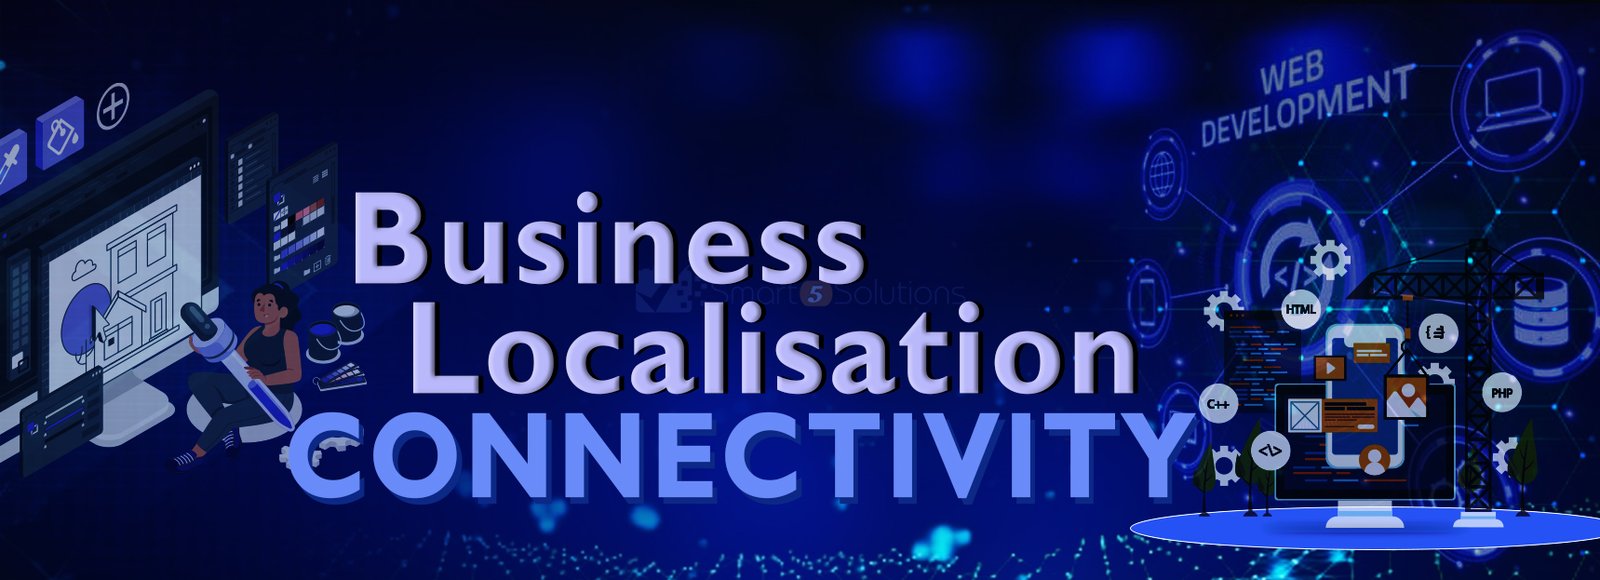 Business Localization Connectivity